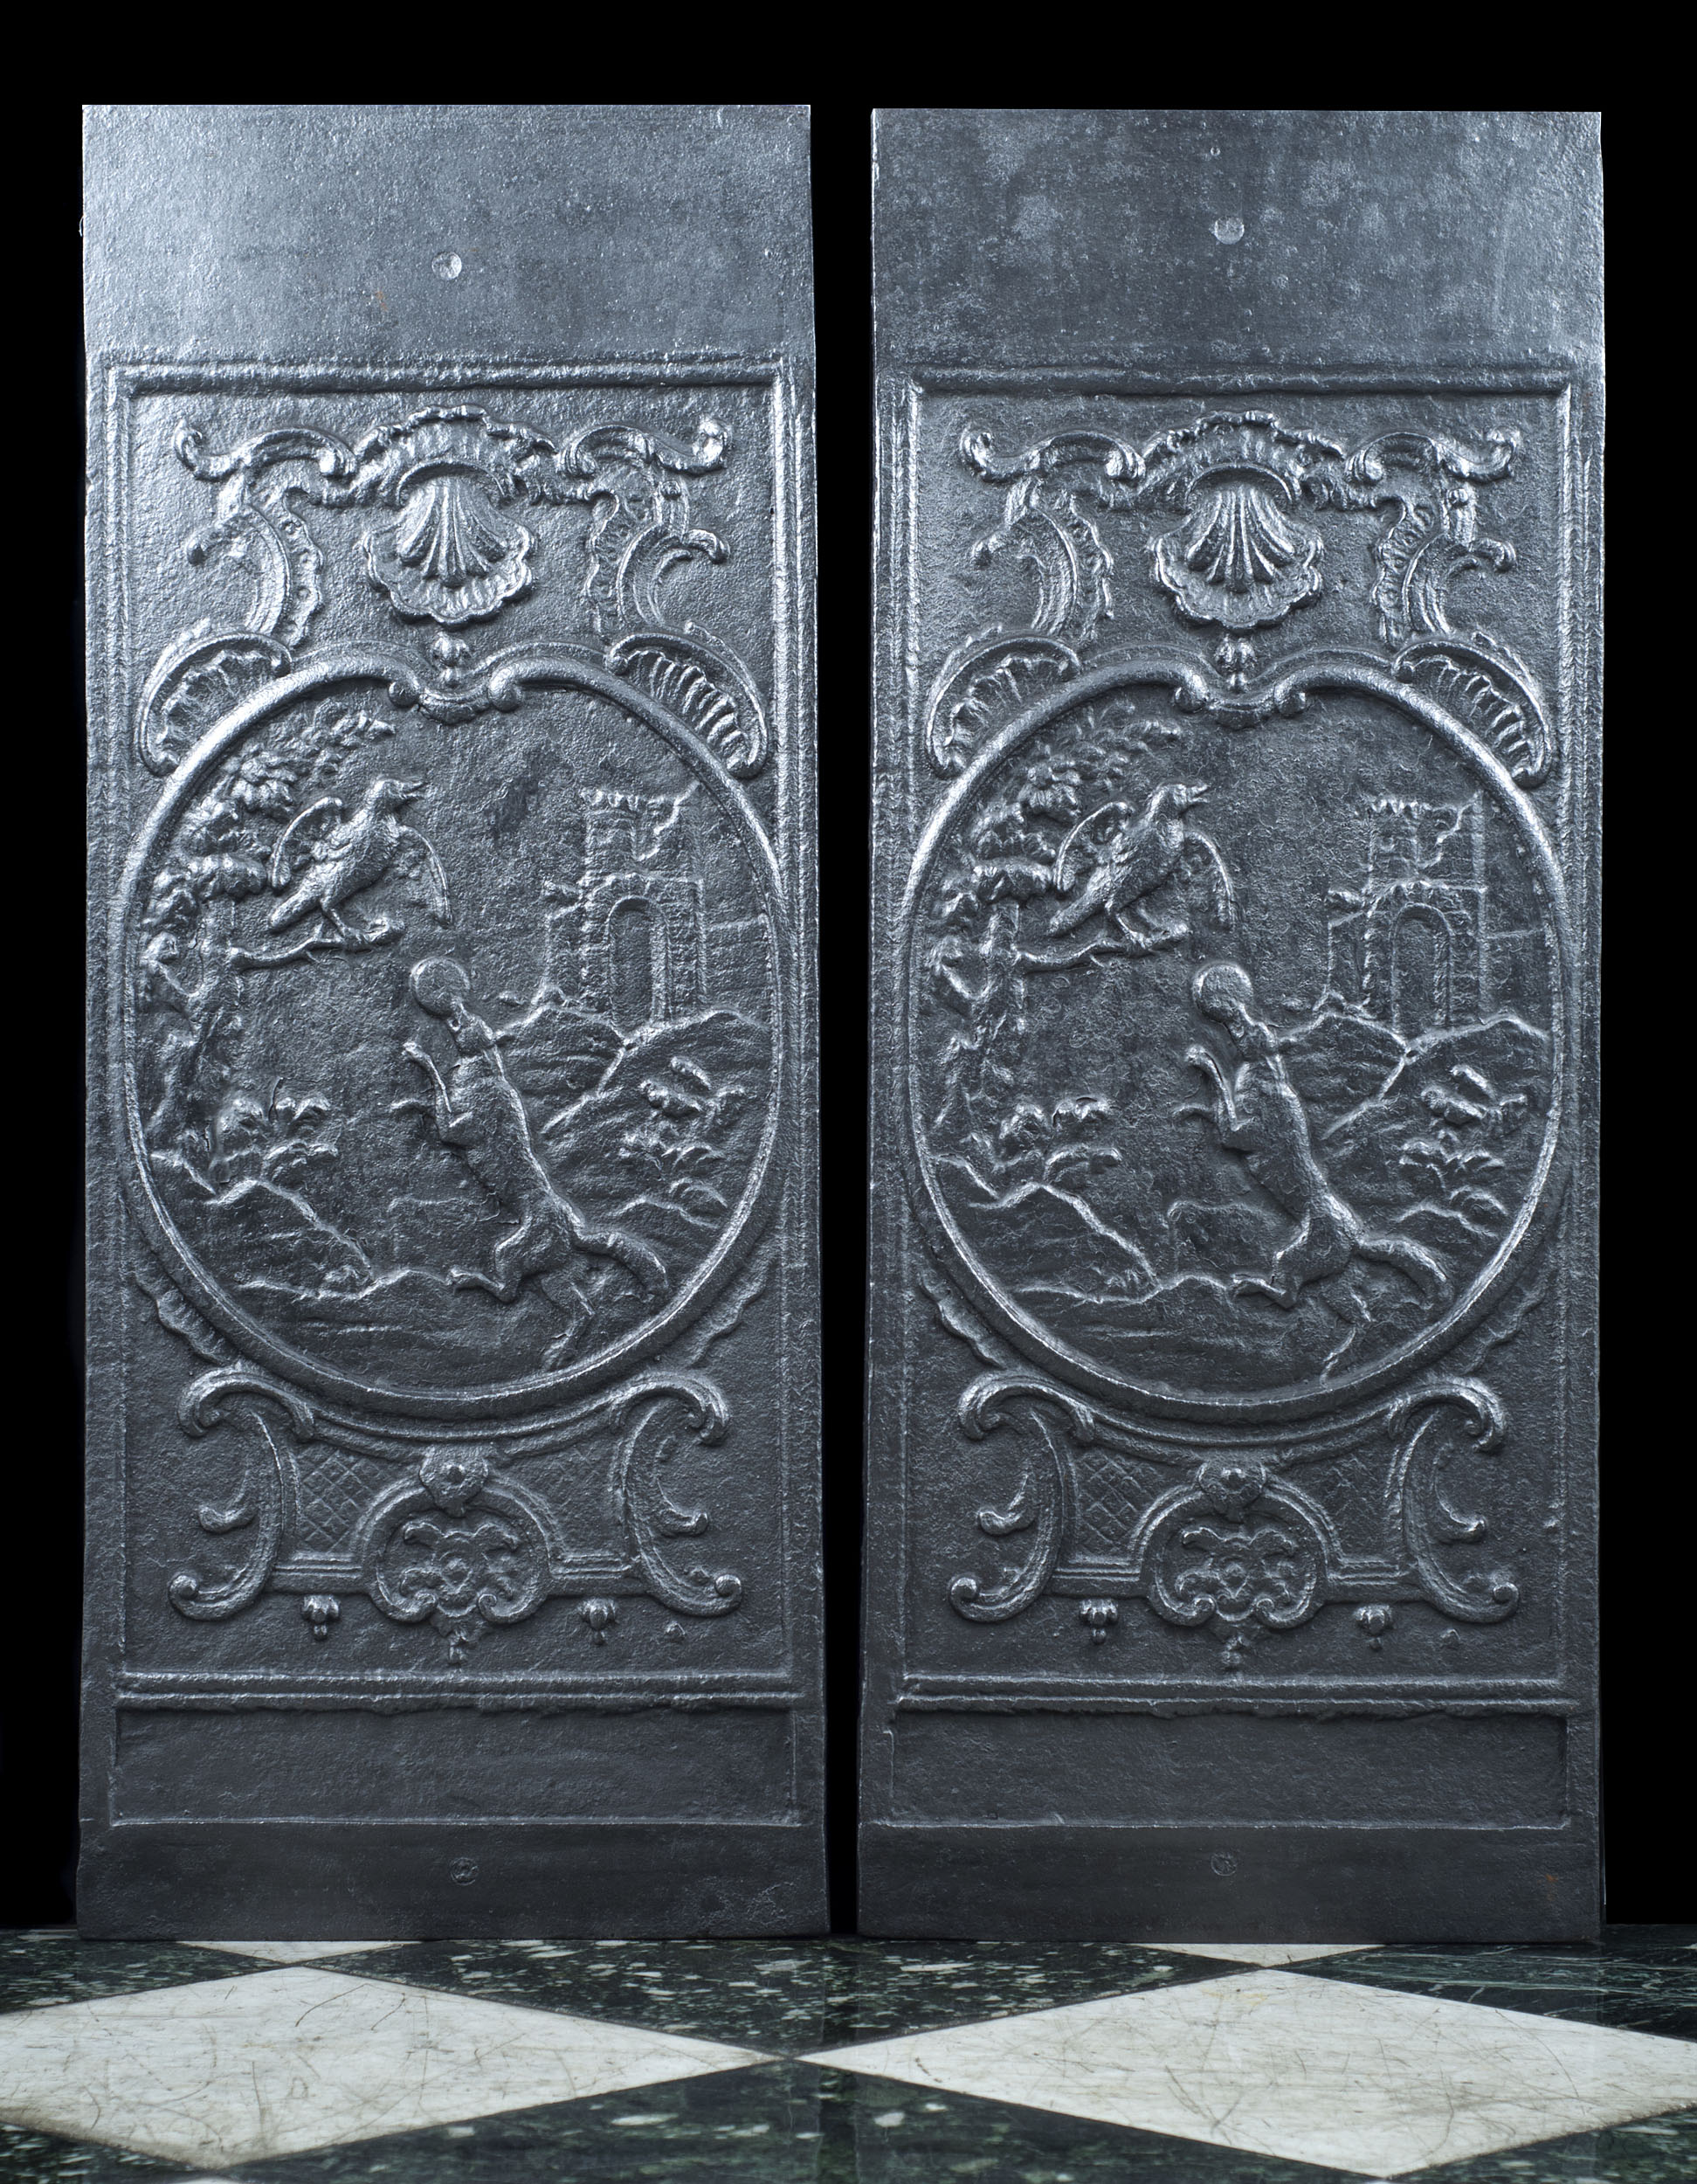 A Pair of Elsley Cast Iron Fireplace Panels 